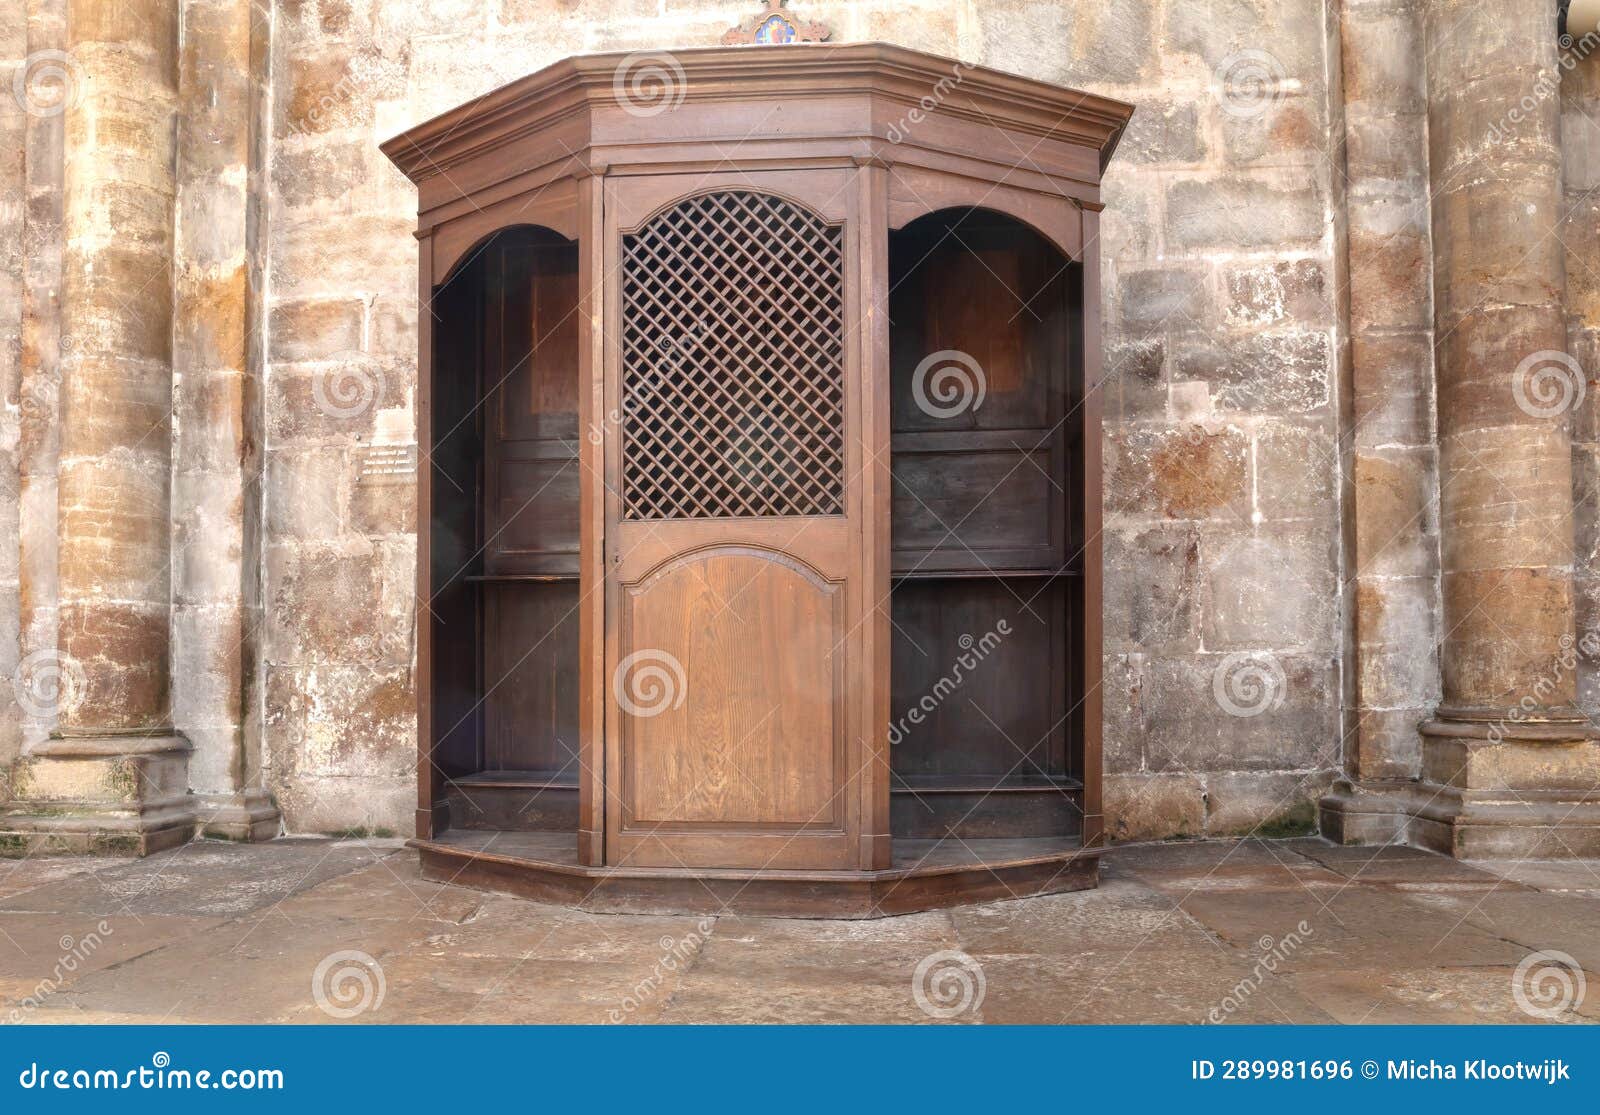 confessional box or booth, a wooden cabinet or stall where the priest presides over confession